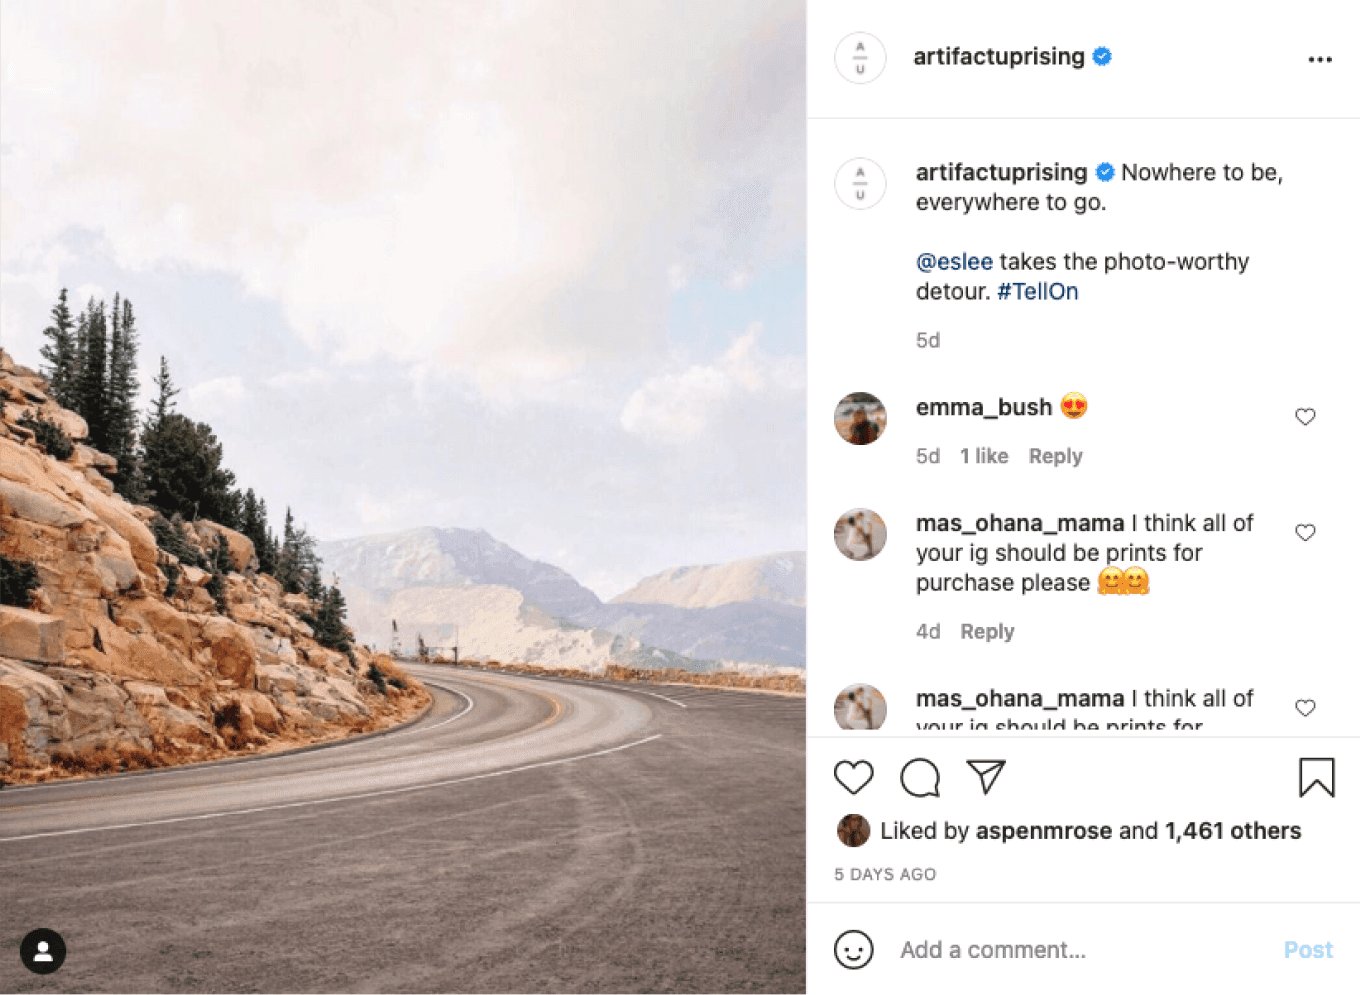 Post from Artifact Uprising's instagram of a winding road in a mountainous area that recieved a lot of engagement